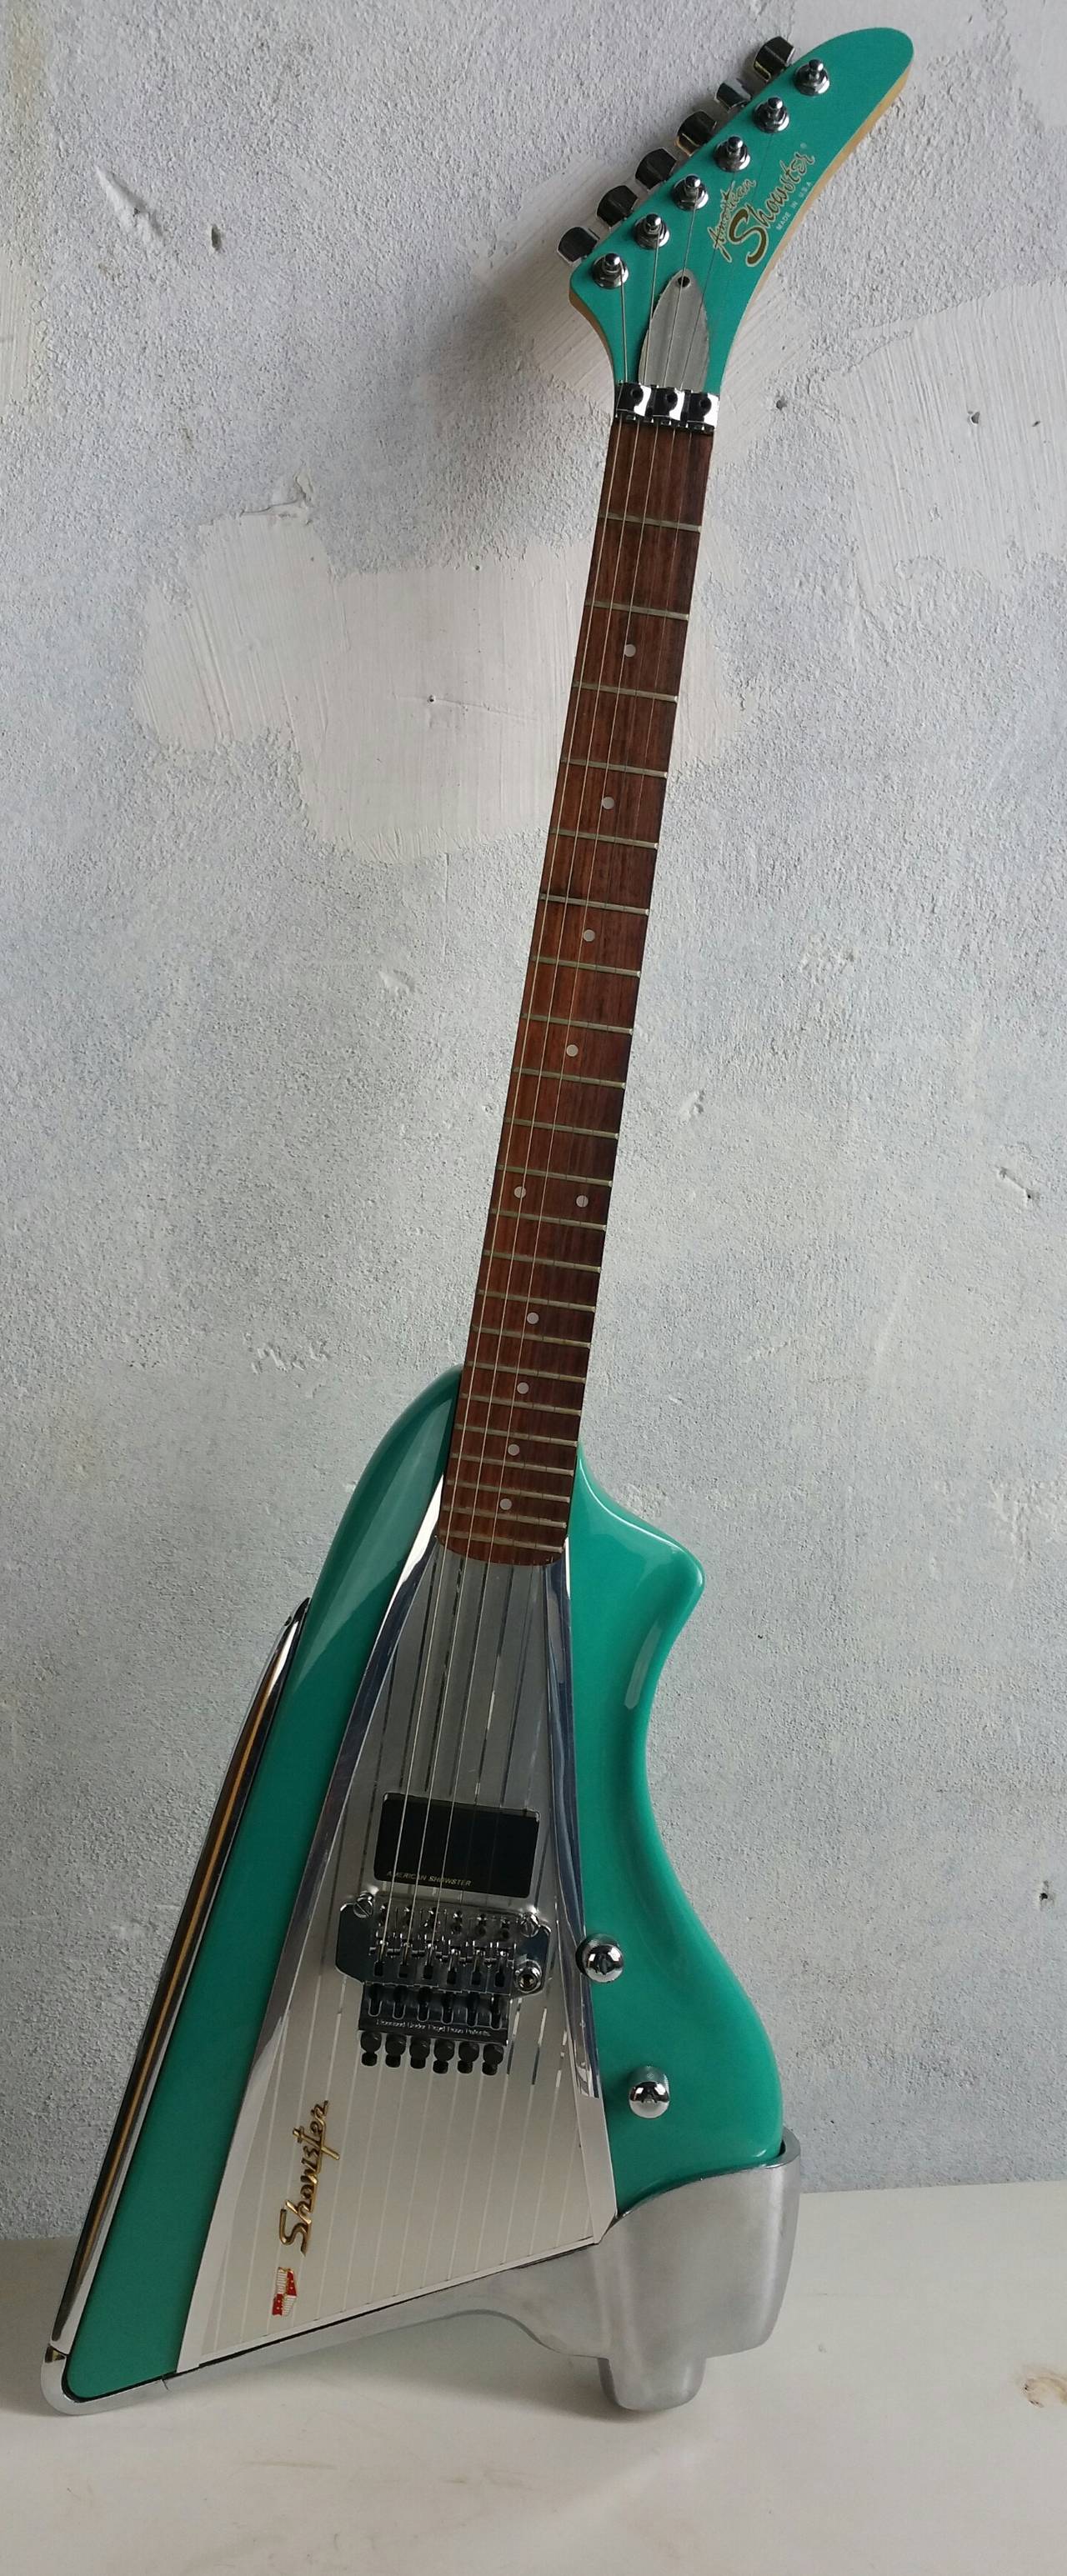 Beautiful American Showster Electric Guitar,, Model AS-57,, Amazing modernist design,,In the mid 80's Chevrolet licenced the design of the '57 Chevy tail fin to the American Showster, In 1983 the AS-57 was born offering the same color variations as